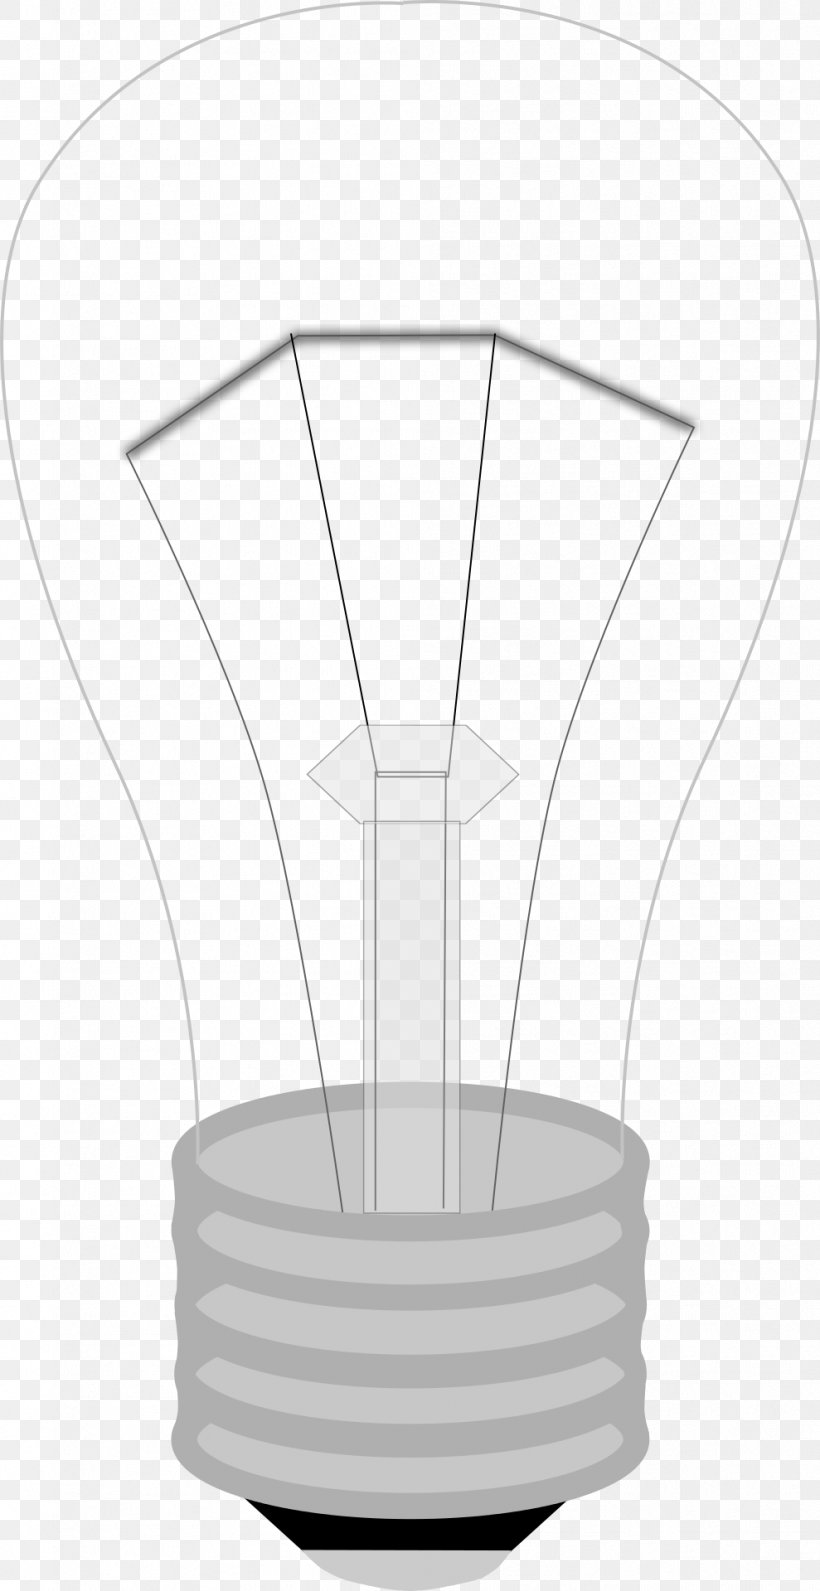 Incandescent Light Bulb Electricity, PNG, 989x1920px, Light, Black And White, Drinkware, Electrical Filament, Electricity Download Free